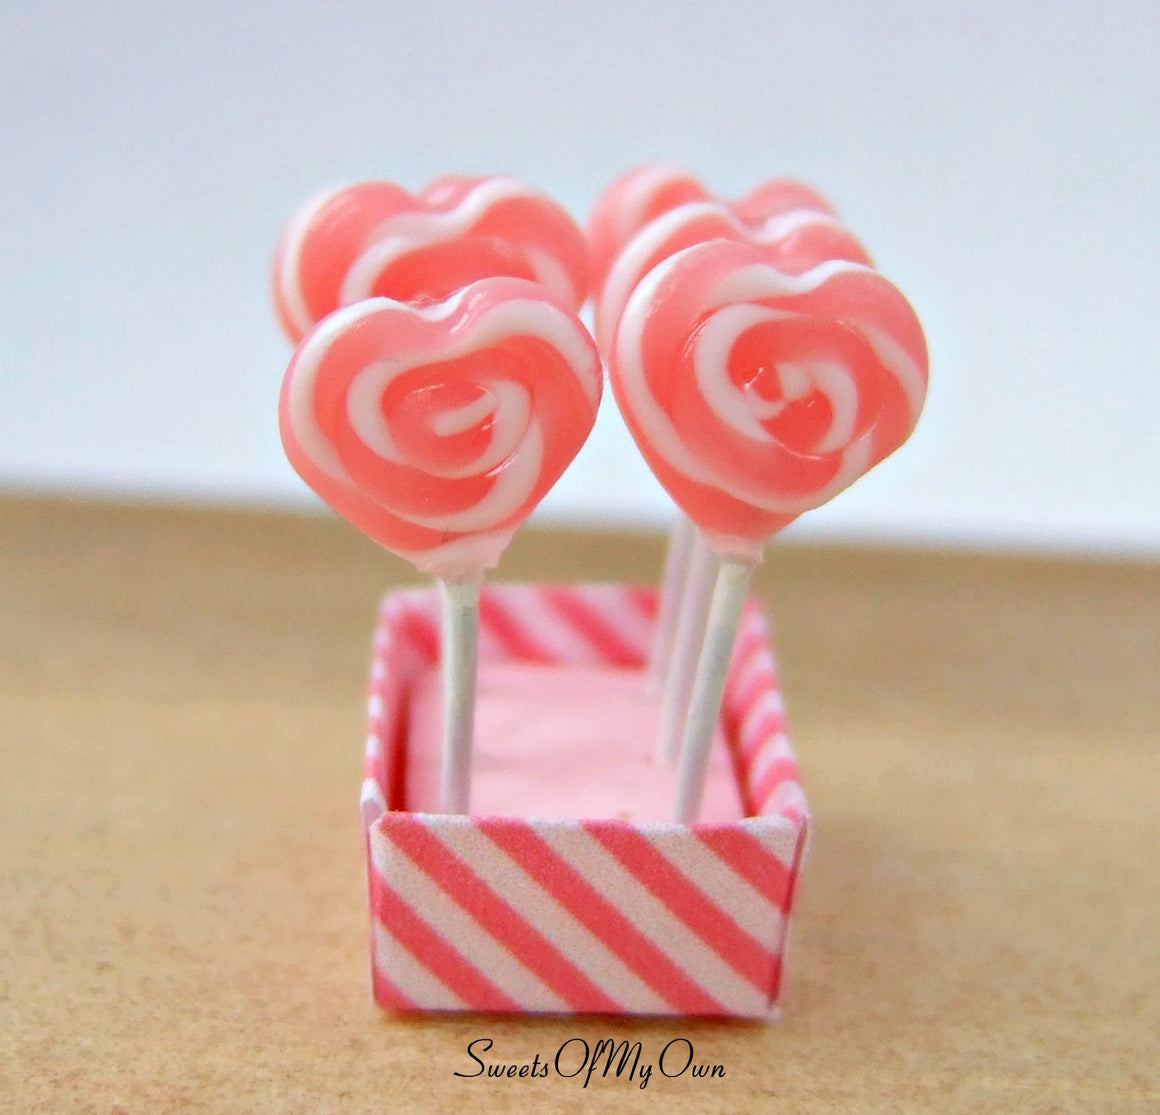 Miniature Pink and White Heart Lollipops - Doll House 1:12 Scale - SweetsOfMyOwn